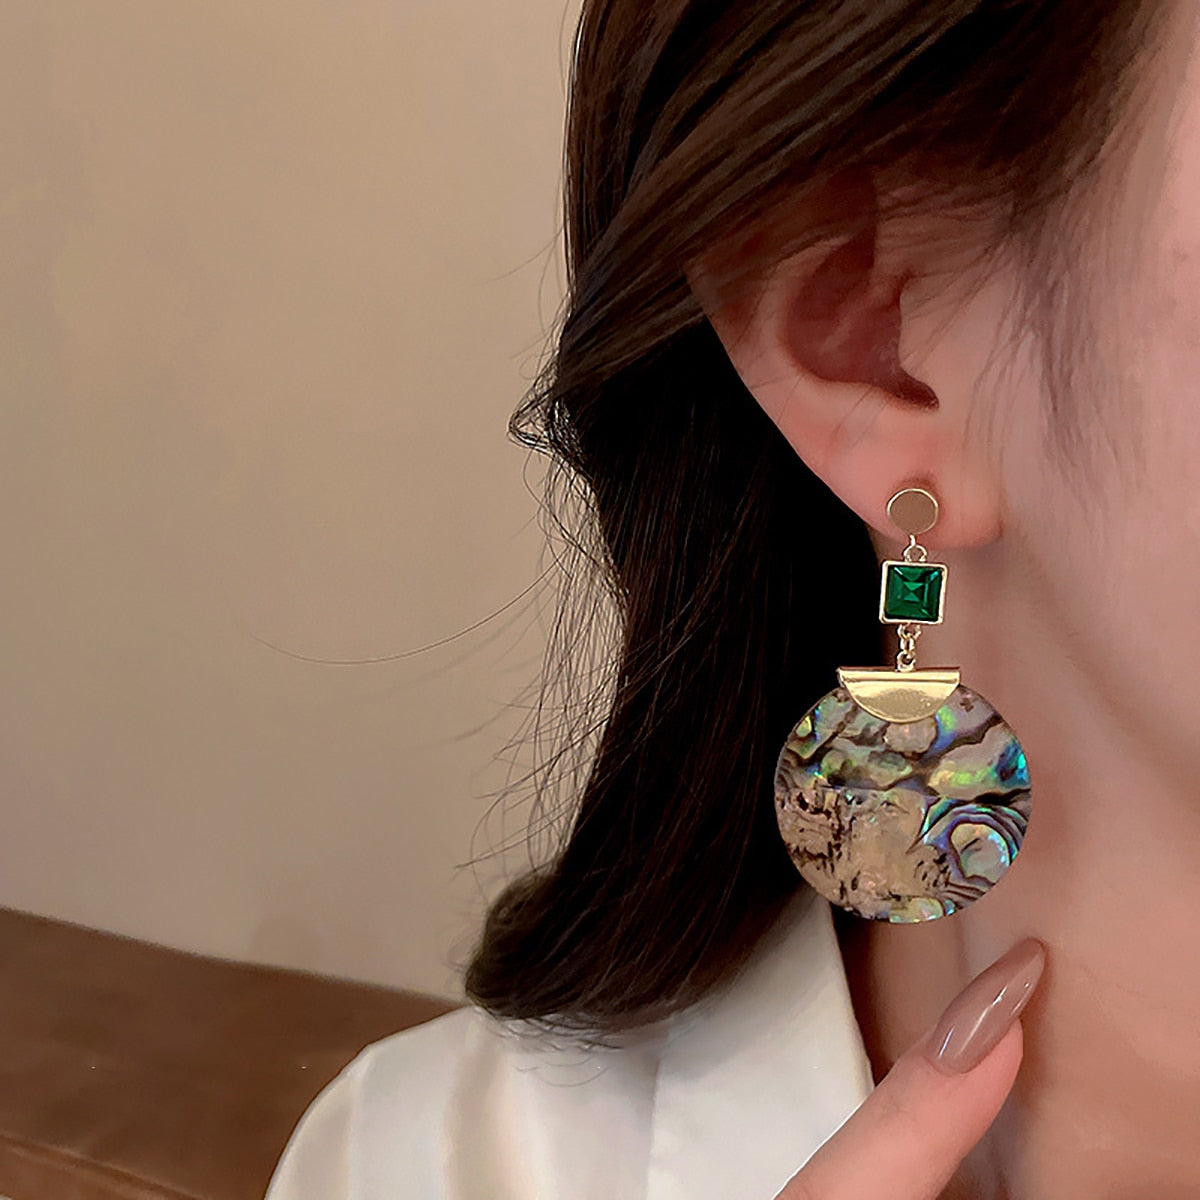 Vintage-Inspired Abalone Shell Drop Earrings